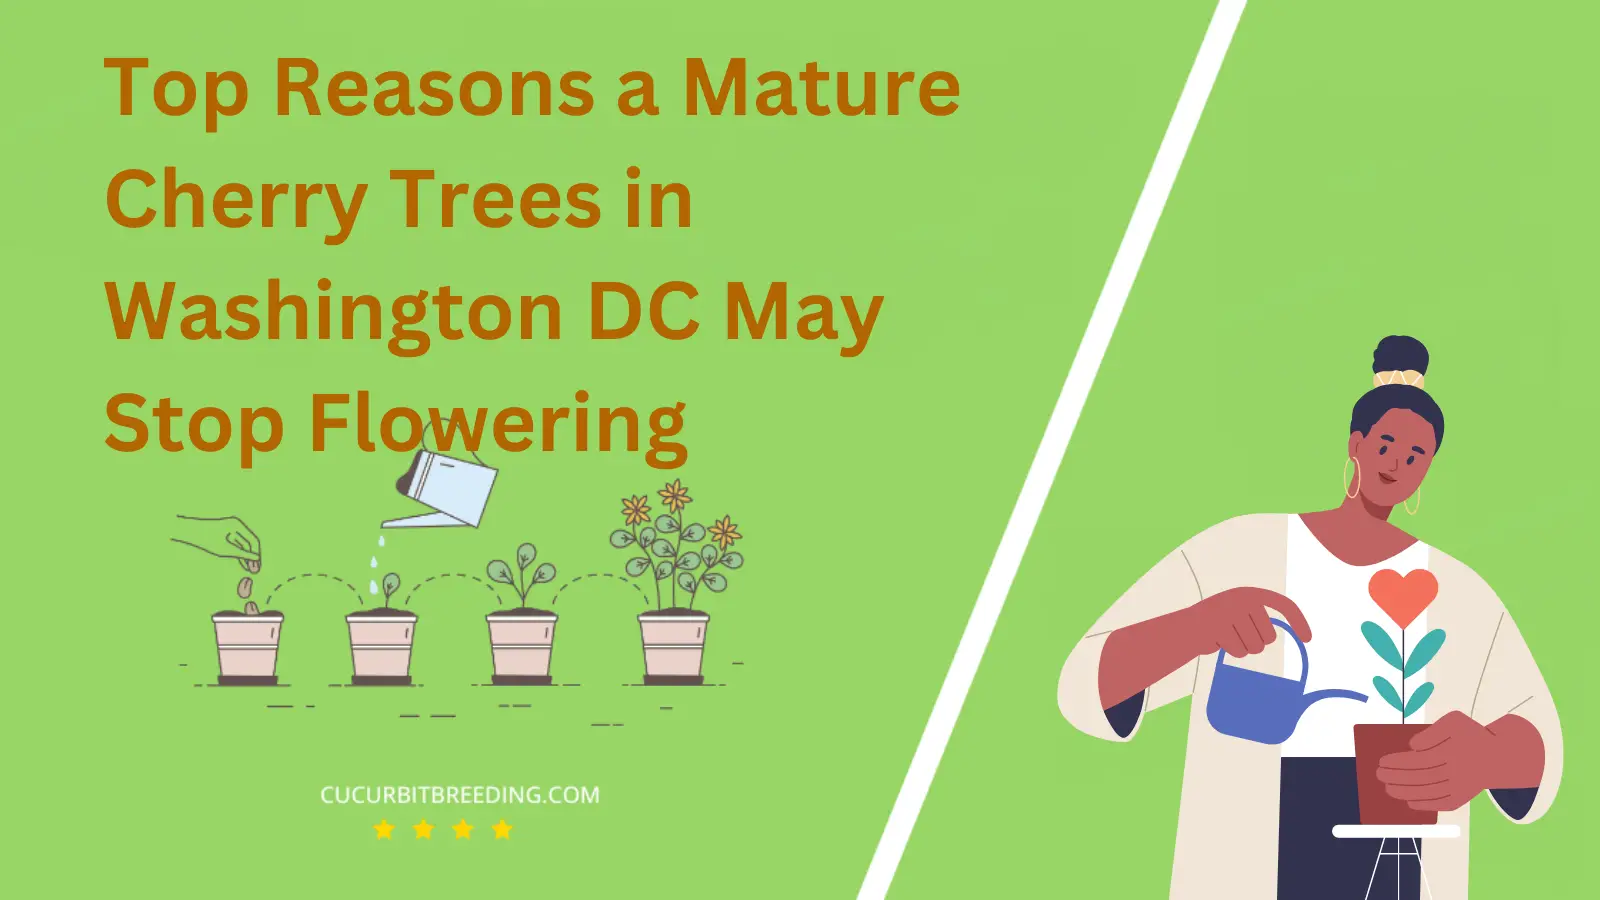 Top Reasons a Mature Cherry Trees in Washington DC May Stop Flowering